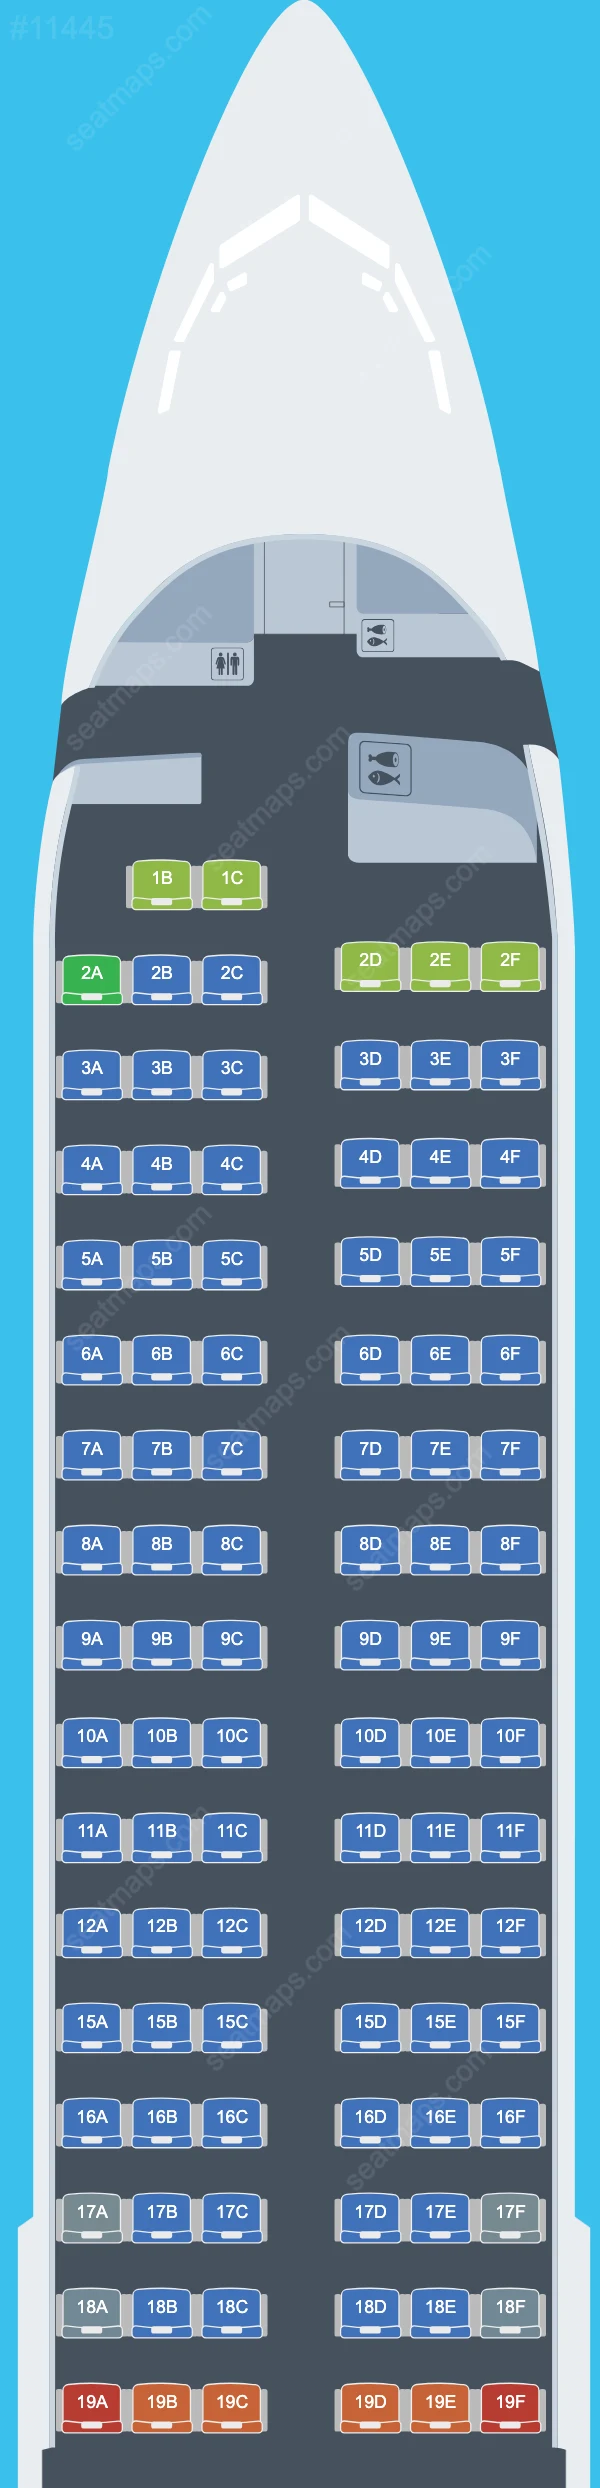 Rossiya Boeing 737-900 ER seatmap mobile preview